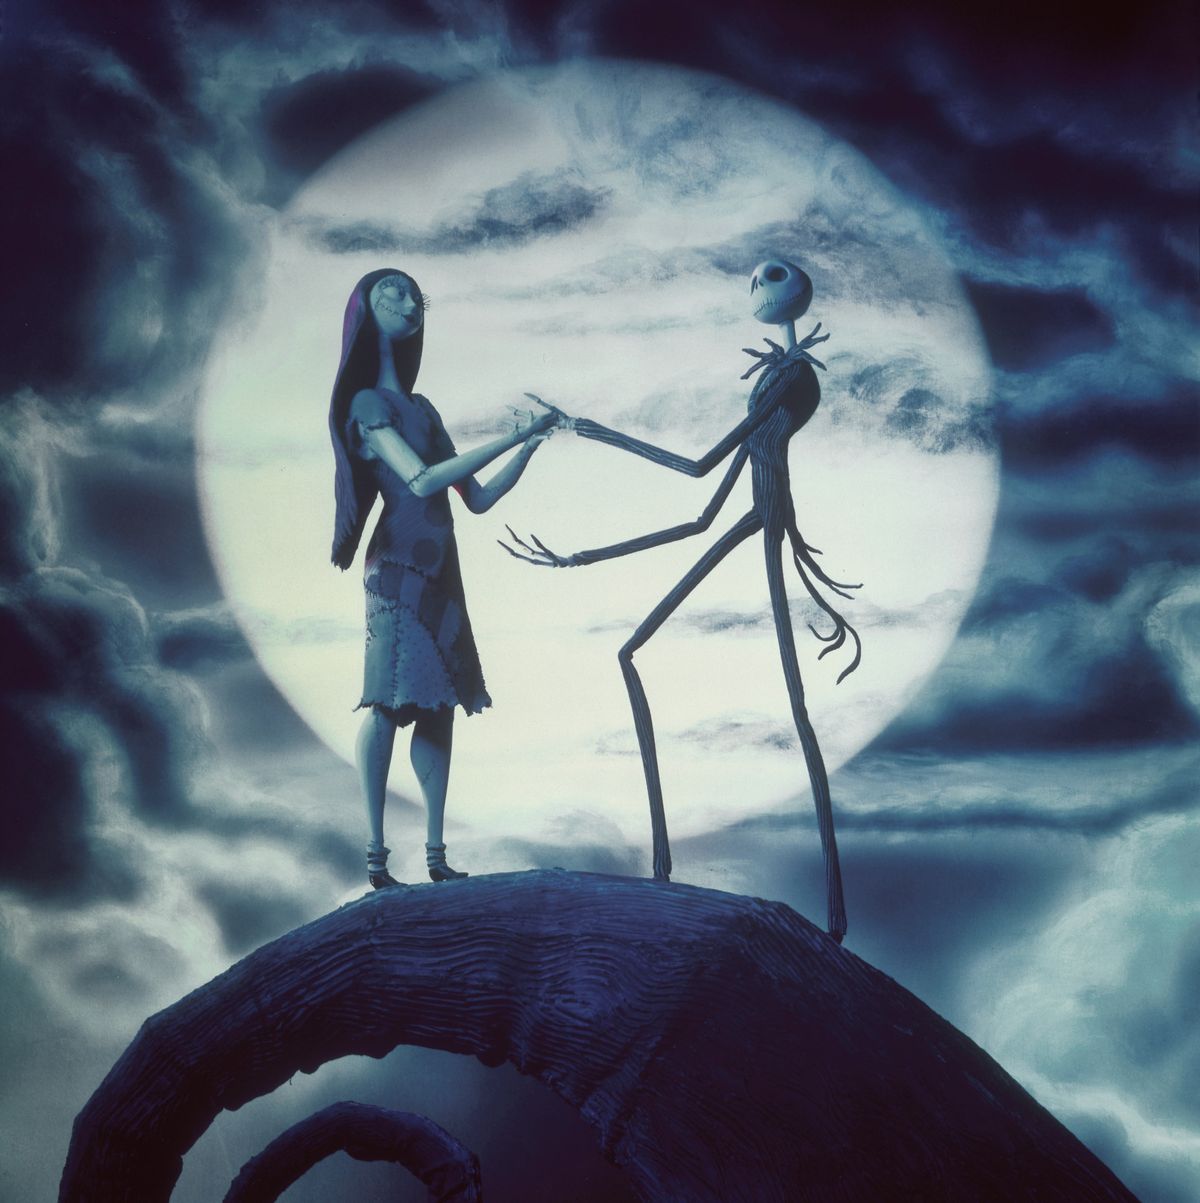 55 Best Nightmare Before Christmas Quotes From Jack, Sally & More